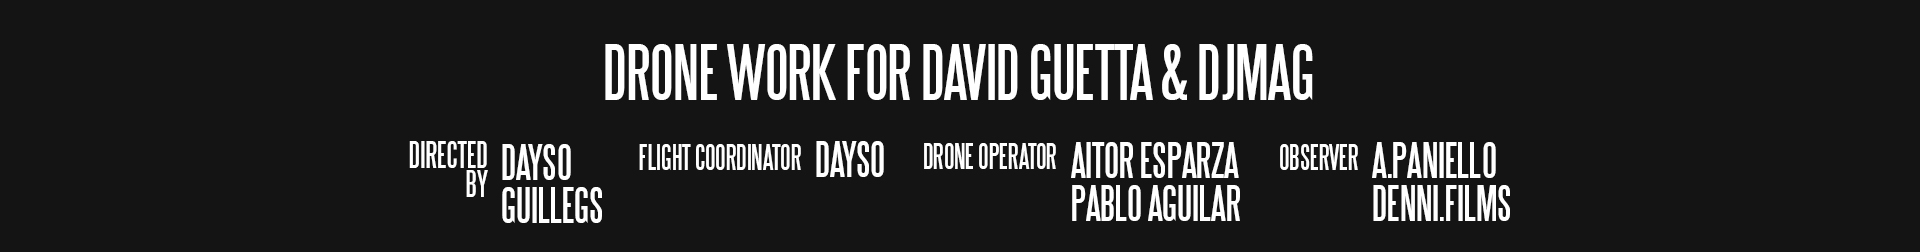 DRONE-WOR-FOR-GUETTA